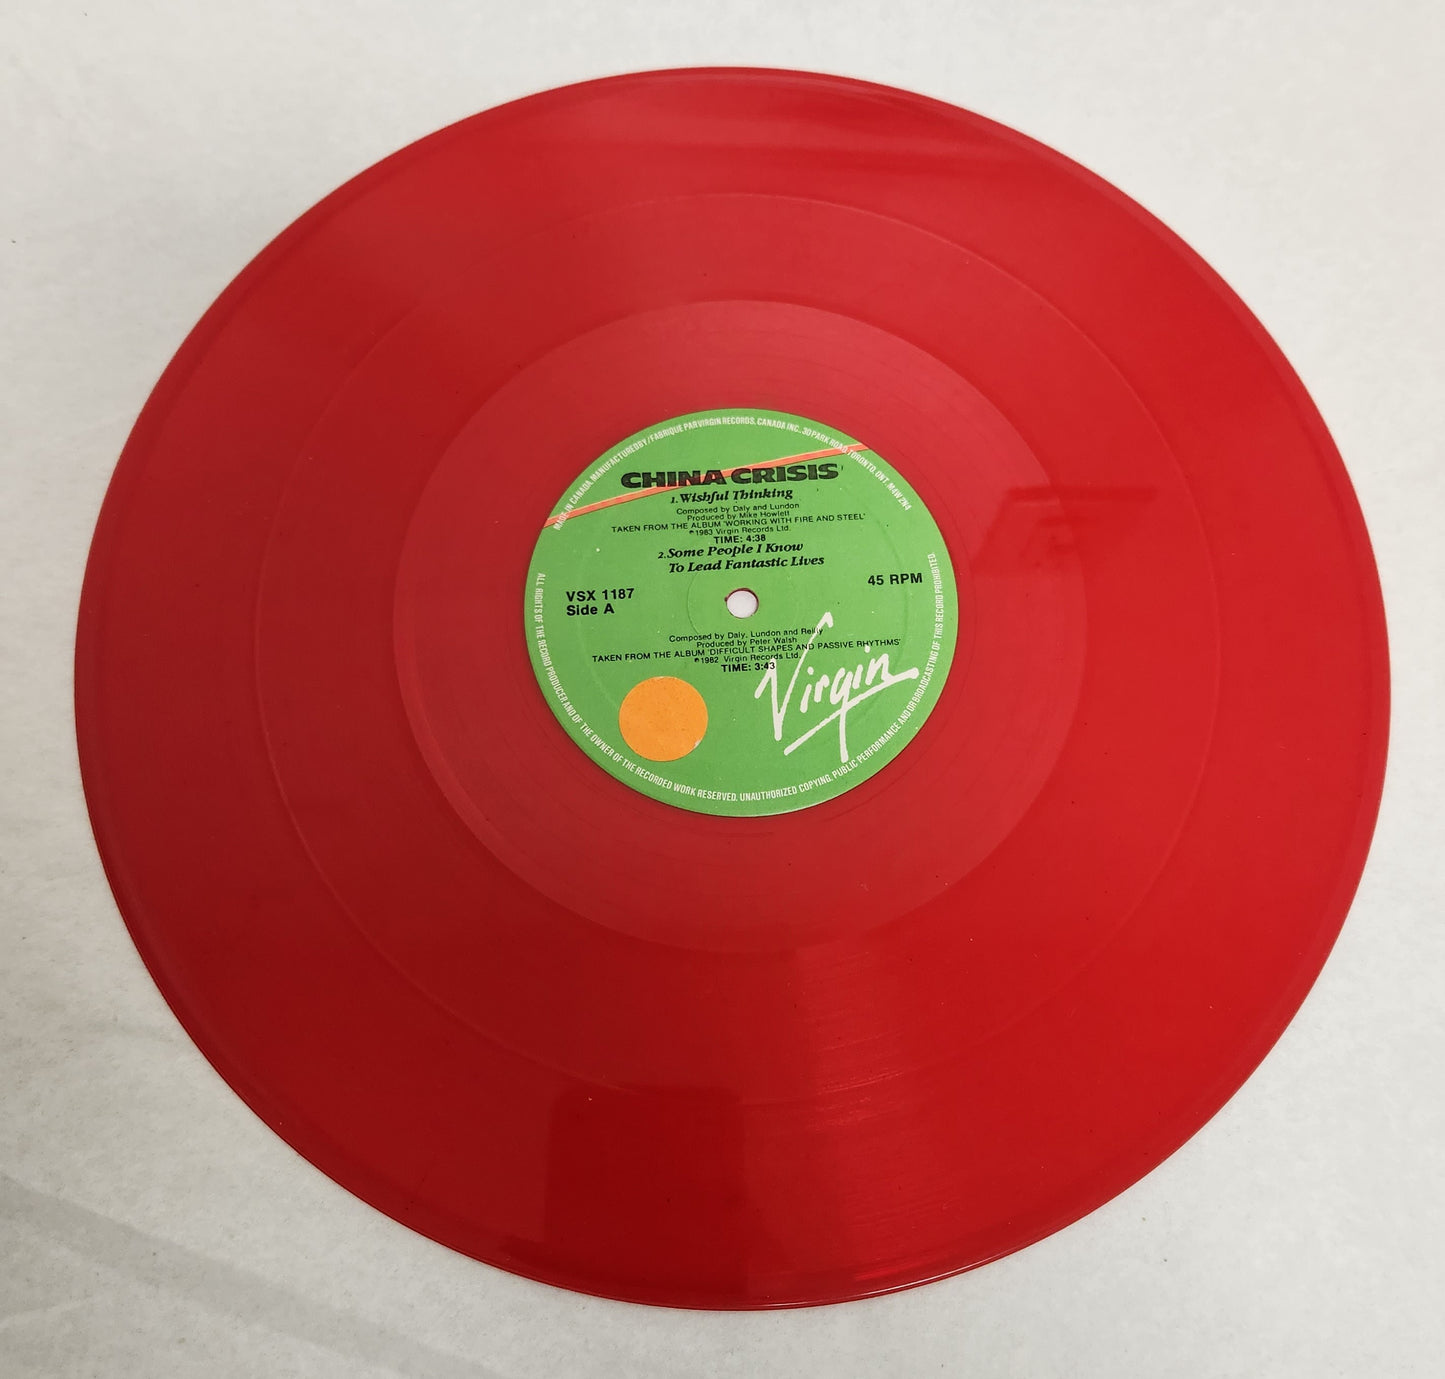 China Crisis "Wishful Thinking" 1983 Limited Edition 45 RPM Red Vinyl Electronic Pop Record Album